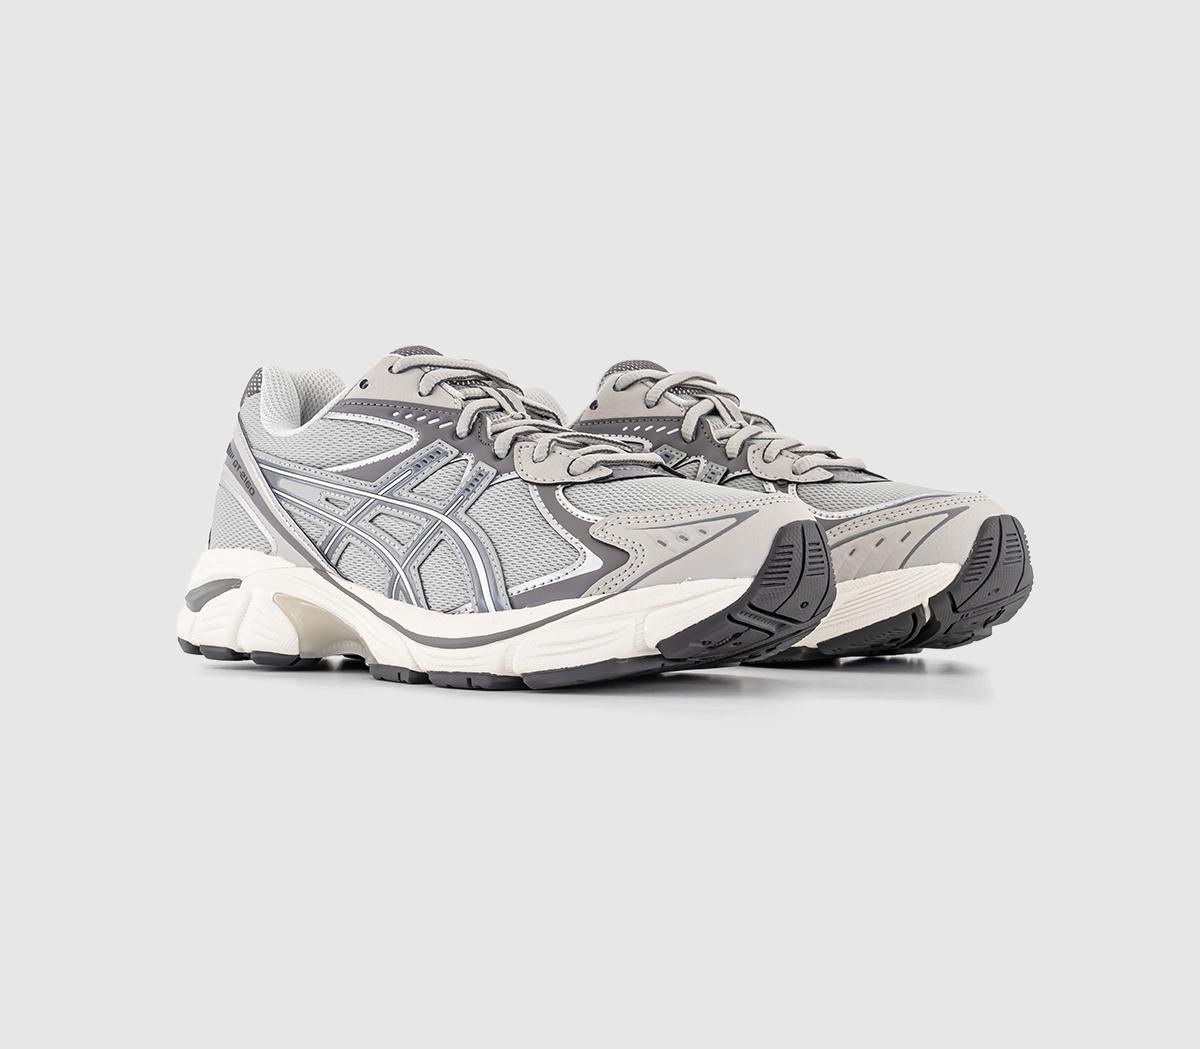 Asics Gt-2160 Trainers Oyster Grey Carbon, 8